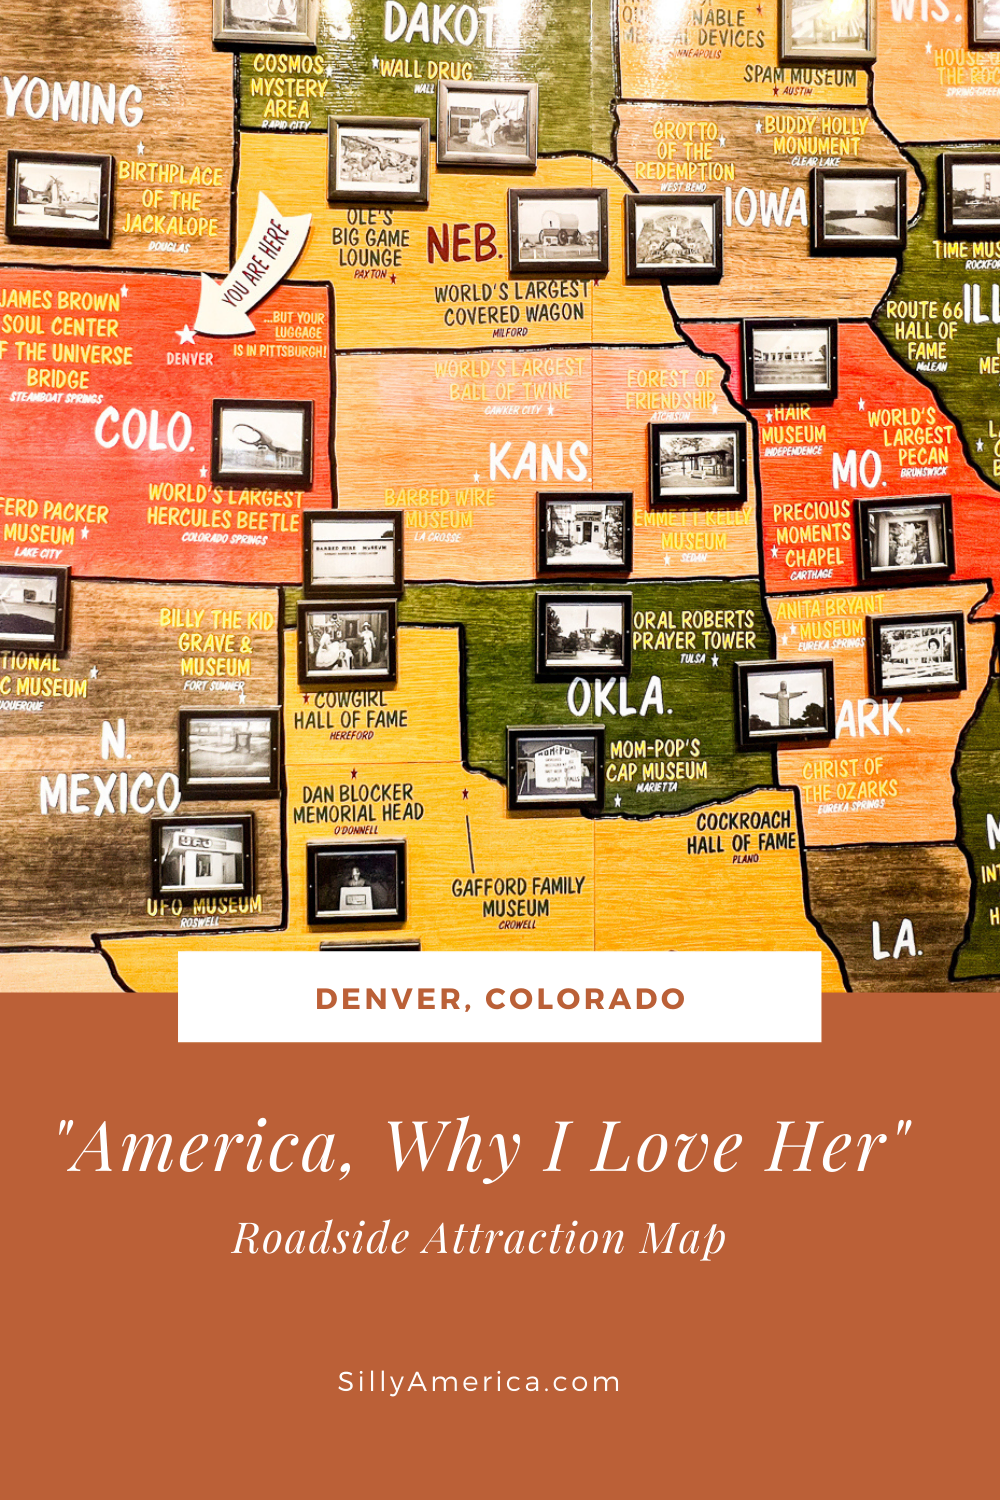 If you're traveling through the Denver International Airport in Colorado keep an eye out for this piece of art: “America, Why I Love Her,” a map of roadside attractions. The giant roadside attractions map is located near baggage claim in the Denver airport. Created by Gary Sweeney, the mixed media mural was inspired by the family road trips he took in his childhood. #RoadTrip #ColoradoRoadTrip #Denver #DenverRoadTrip #RoadsideAttraction #RoadsideAttractions #DenverRoadsdieAttraction